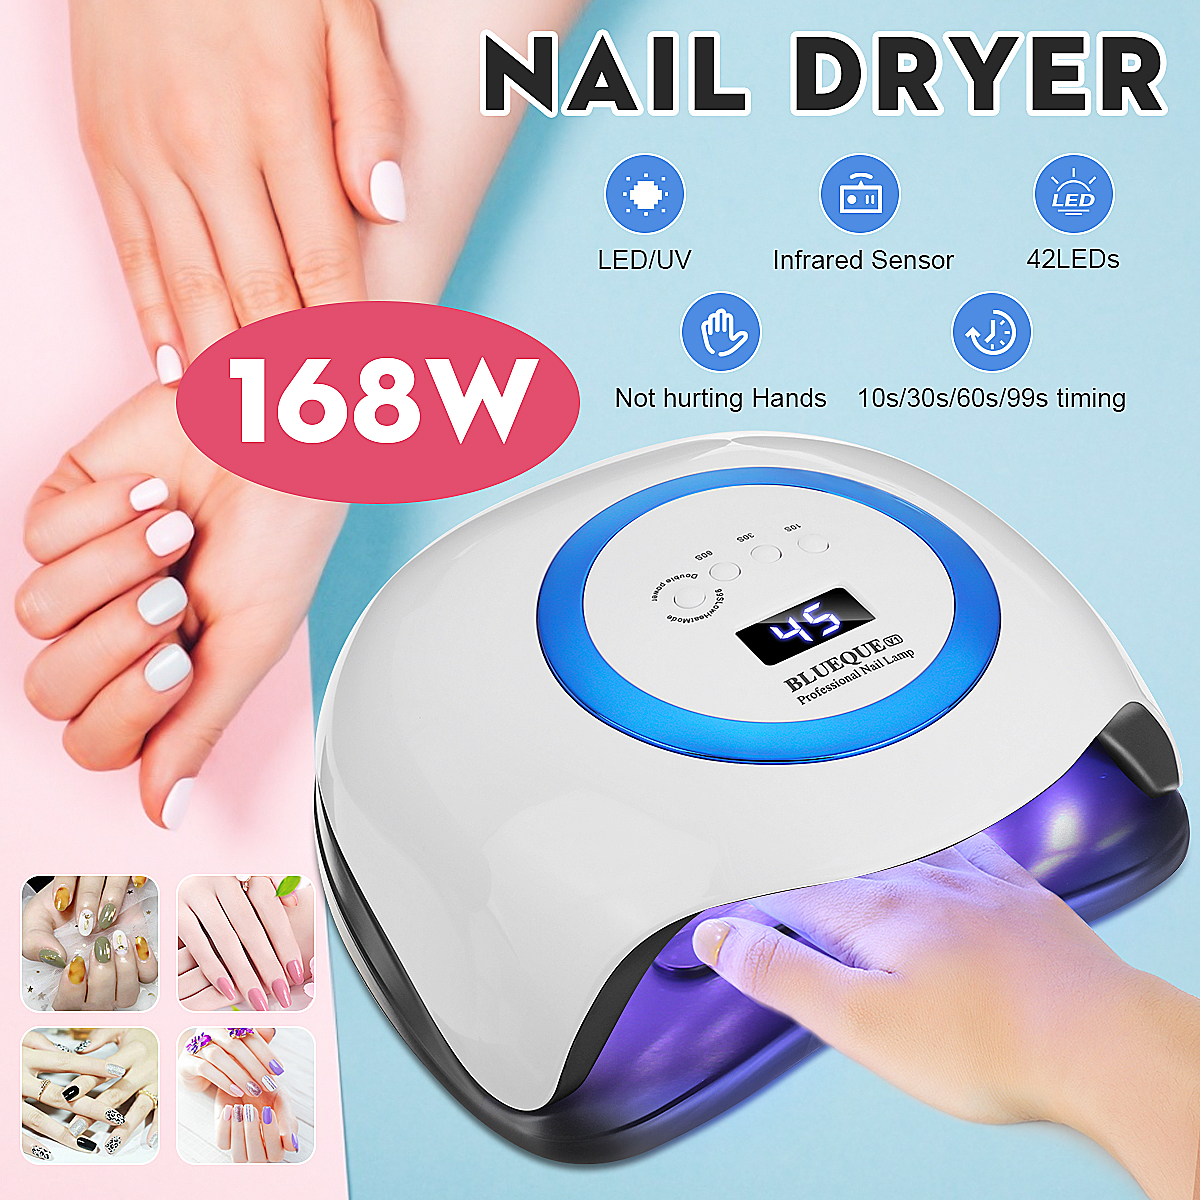 168W-UV-Lamp-Nail-Dryer-Pro-UV-LED-Gel-Nail-Lamp-Fast-Curings-Gel-Polish-Ice-Lamp-for-Nail-Manicure--1668968-1